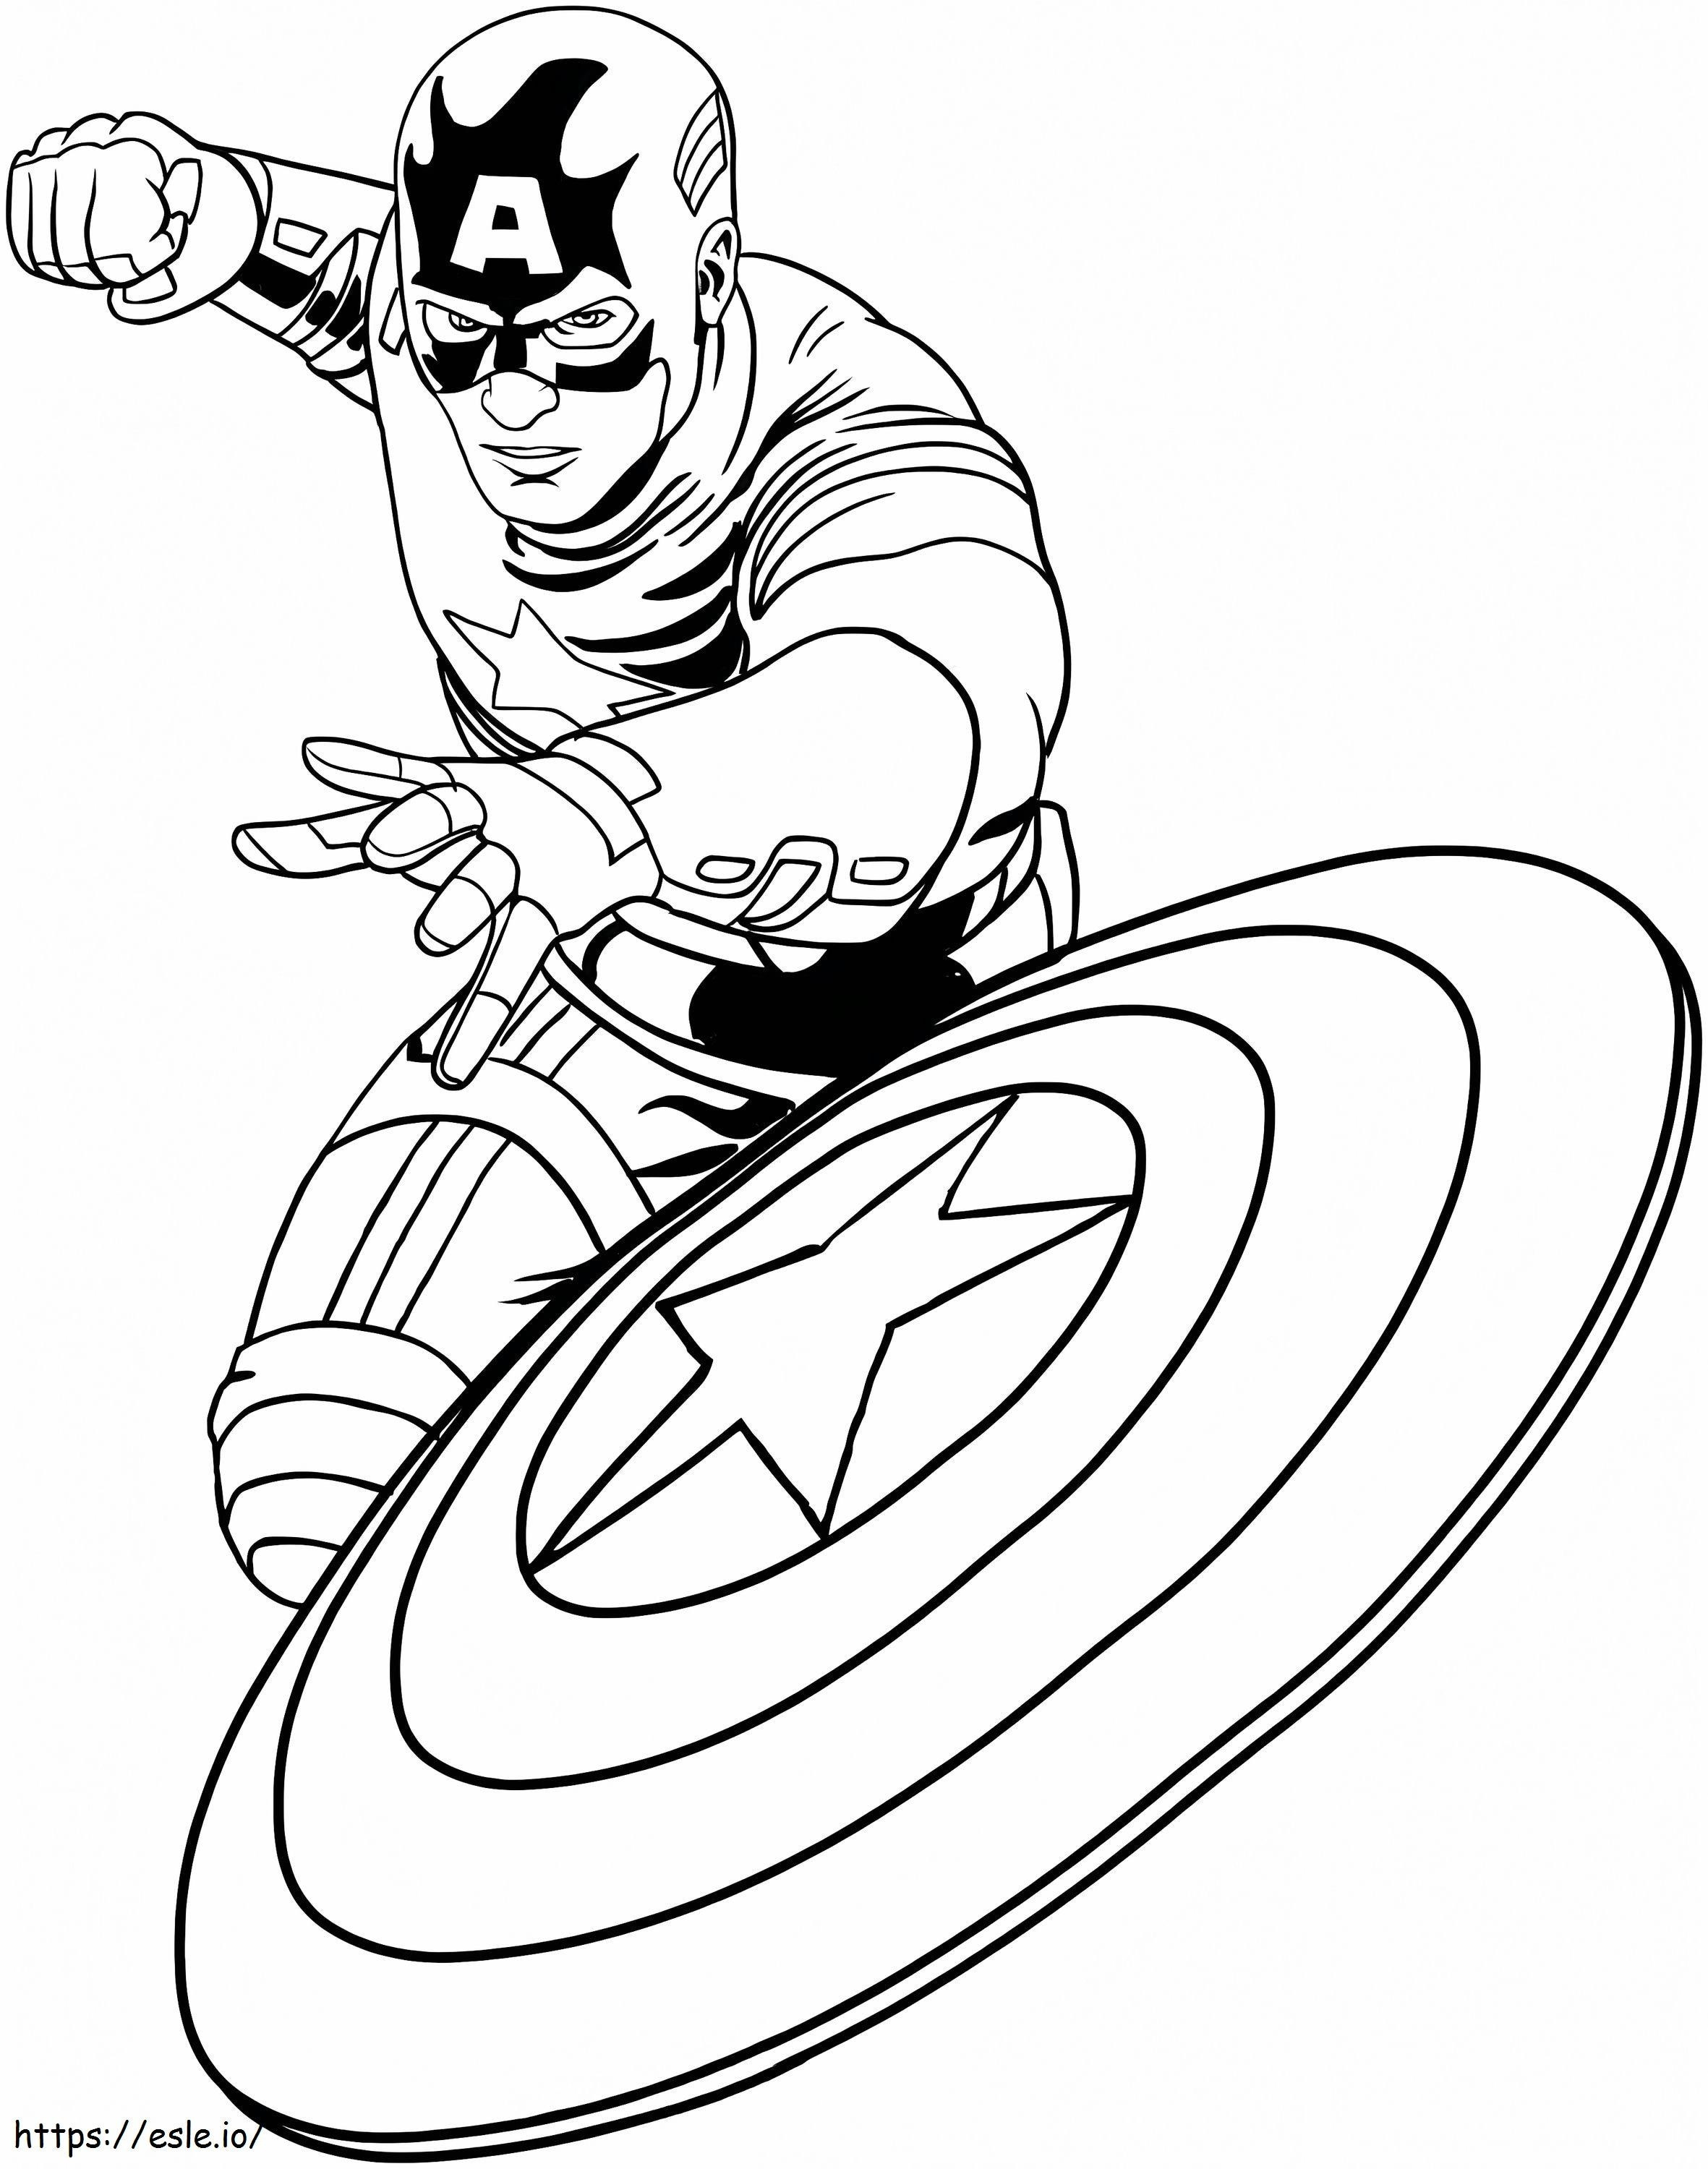 Captain America Throwing A Shield coloring page